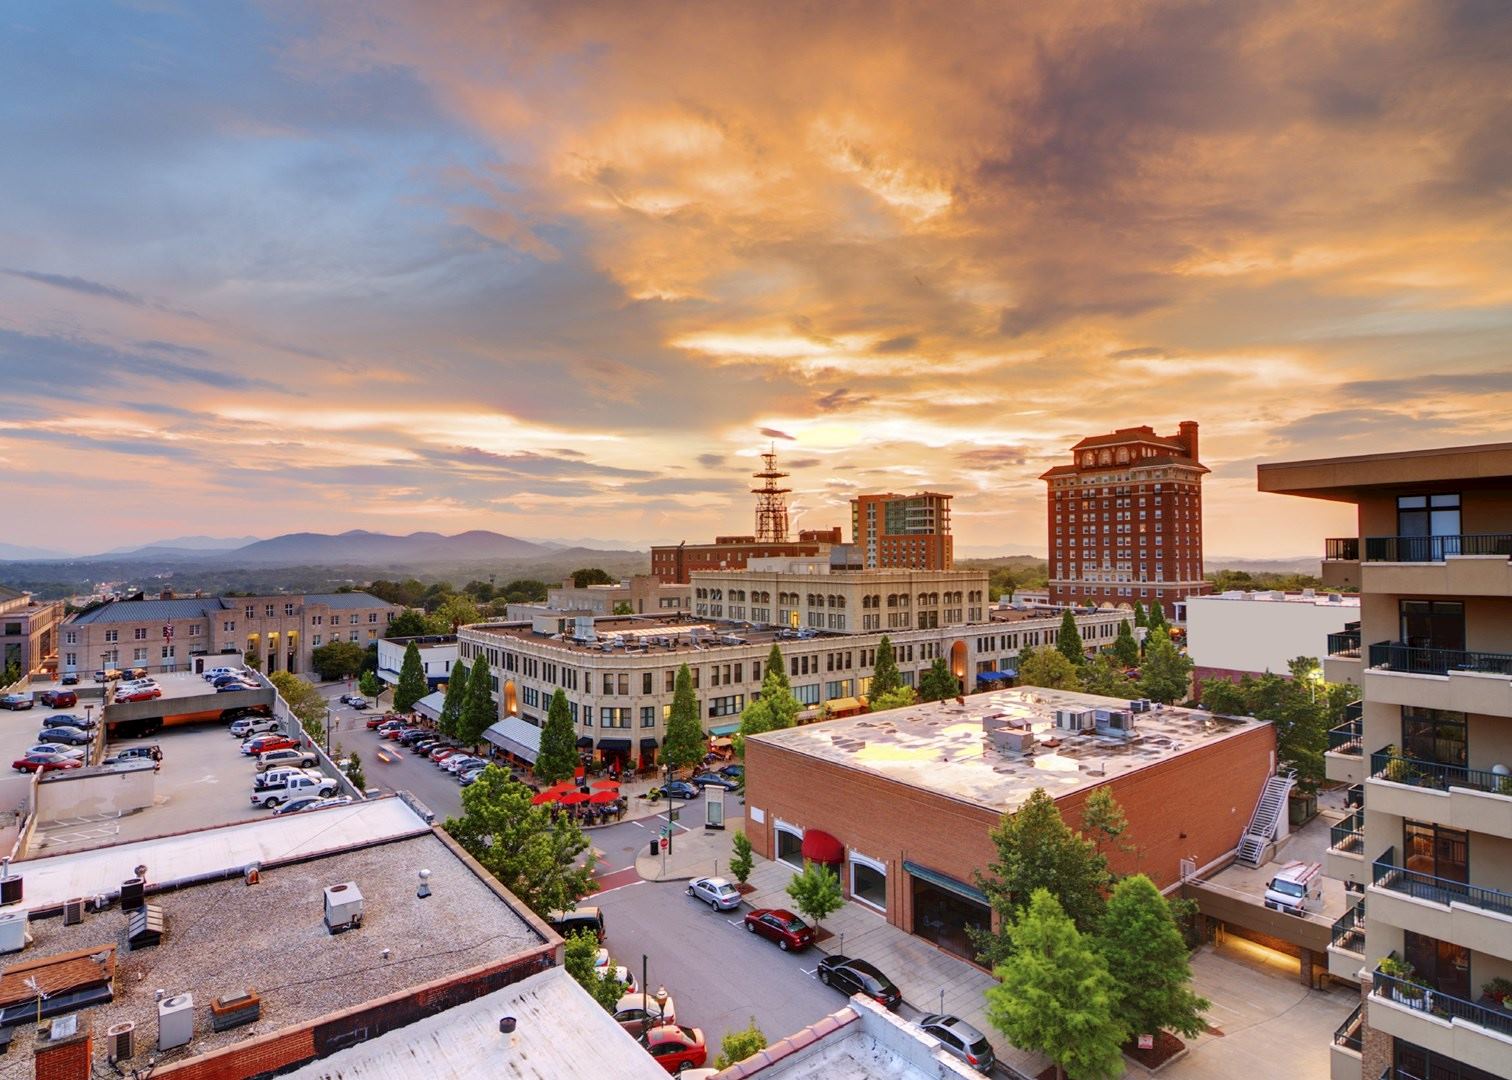 Visit Asheville on a trip to The Deep South | Audley Travel